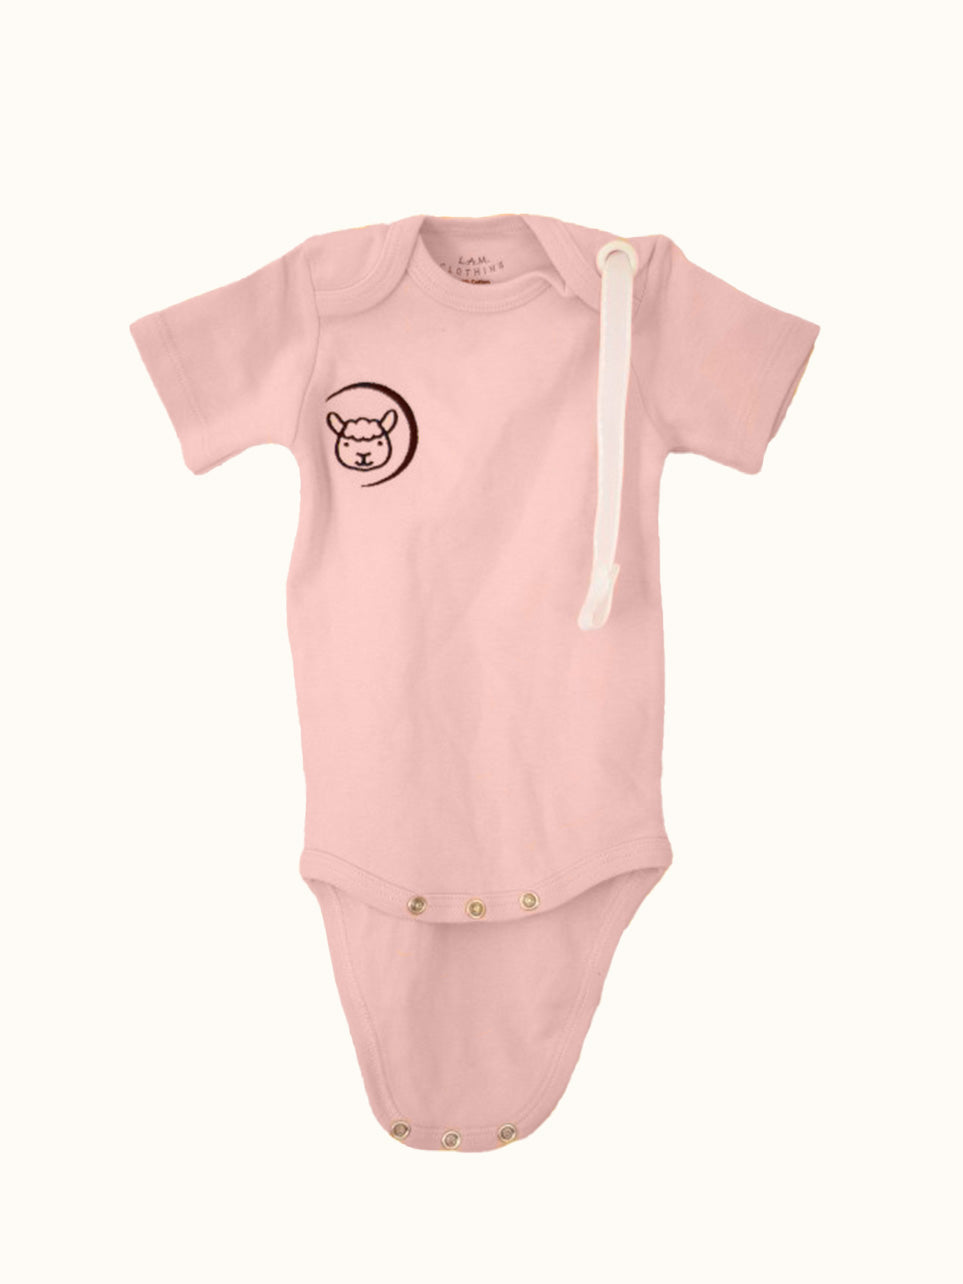 Pink short sleeve Baby Bodysuit with pacifier strap and snap crotch